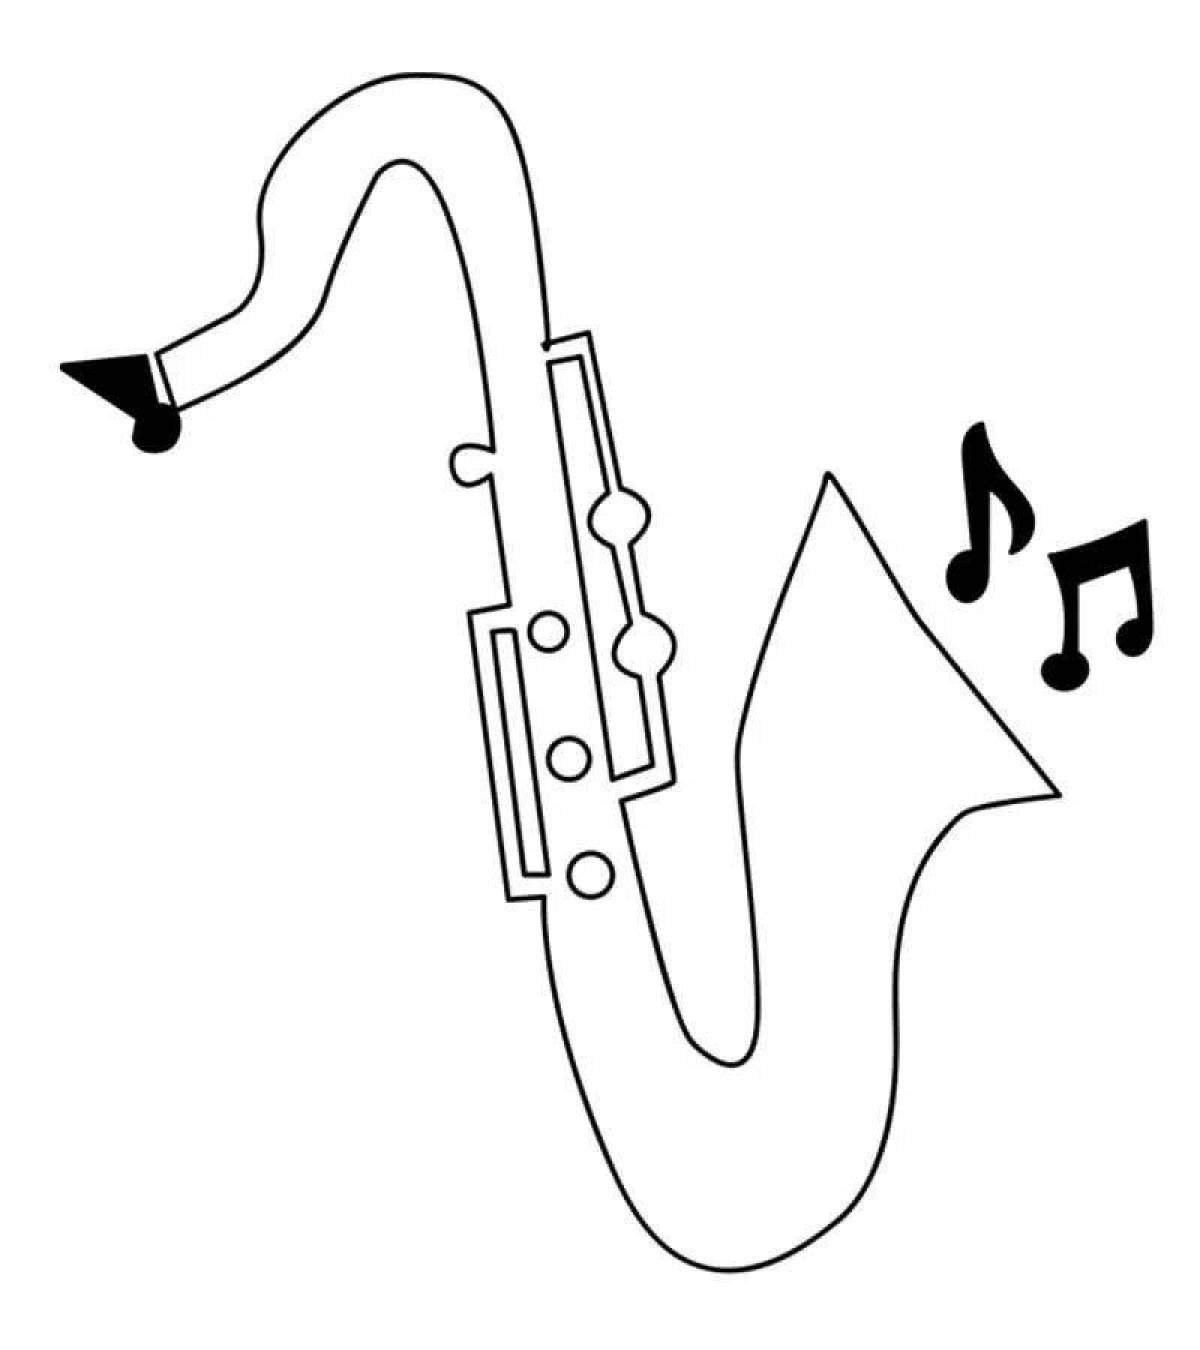 Coloring book gorgeous saxophone